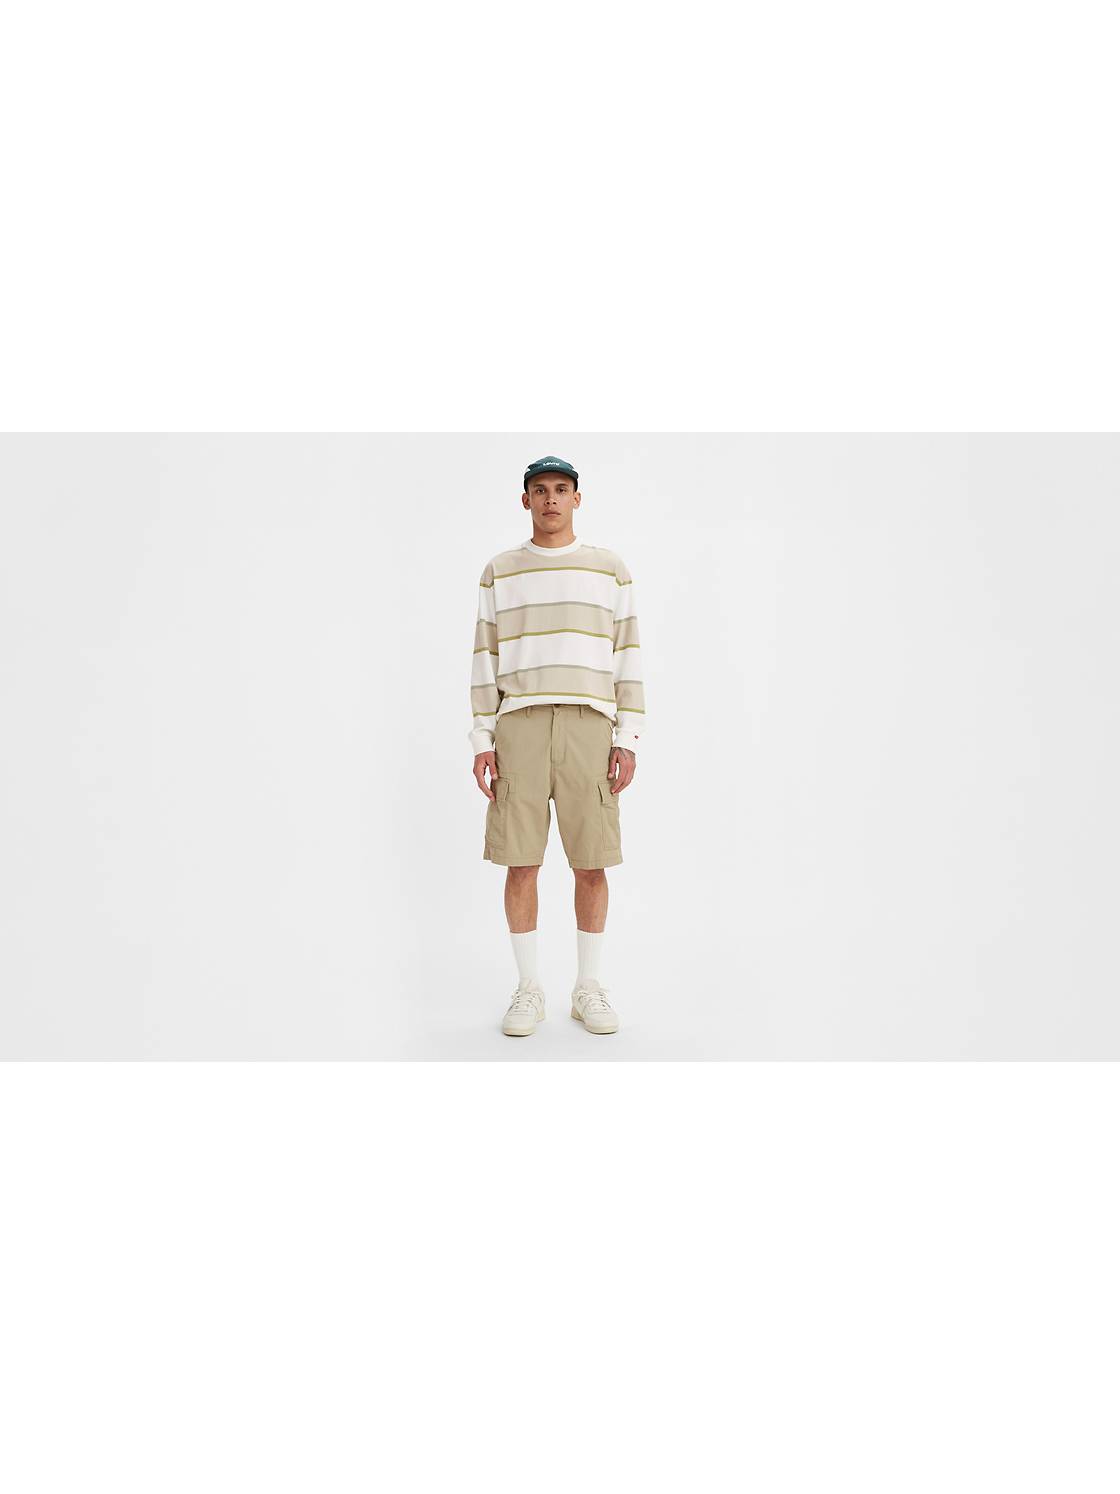 Brown Cargo Shorts Low Rise